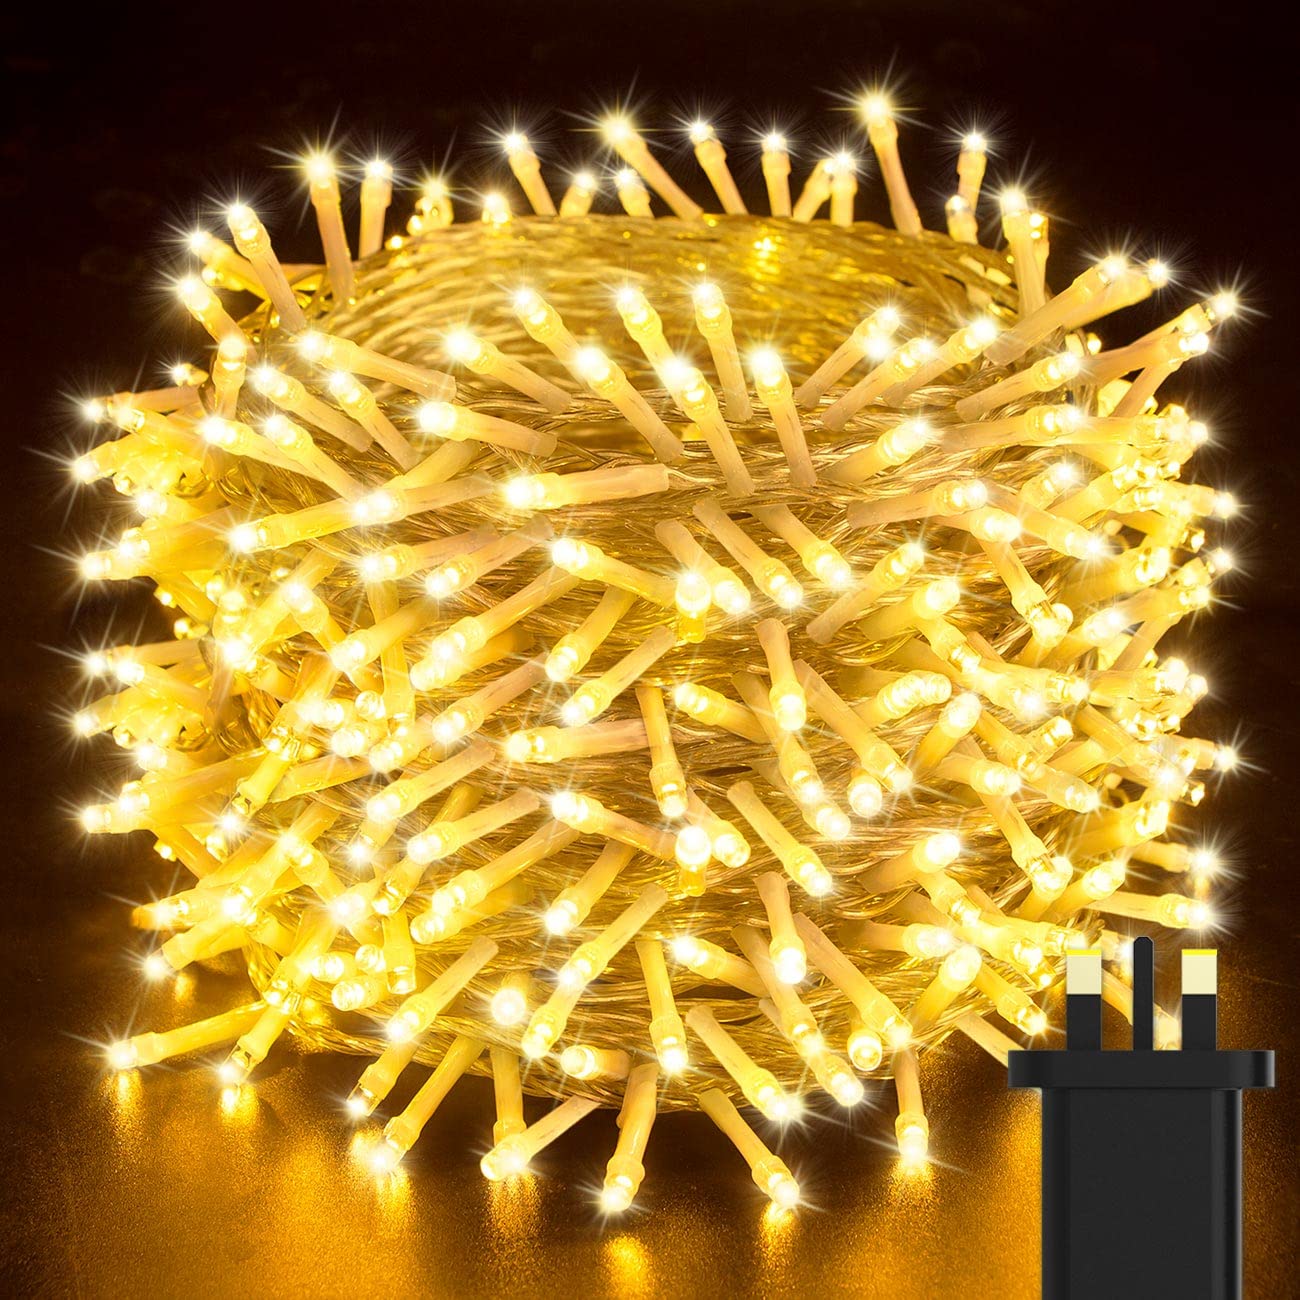 200LED Fairy Lights Plug in Warm White, 25M/82FT Waterproof Outdoor Indoor String Lights Mains Powered, Low Voltage Twinkle Christmas Lights 8 Modes for Bedroom Wedding Garden Party Birthday Trees